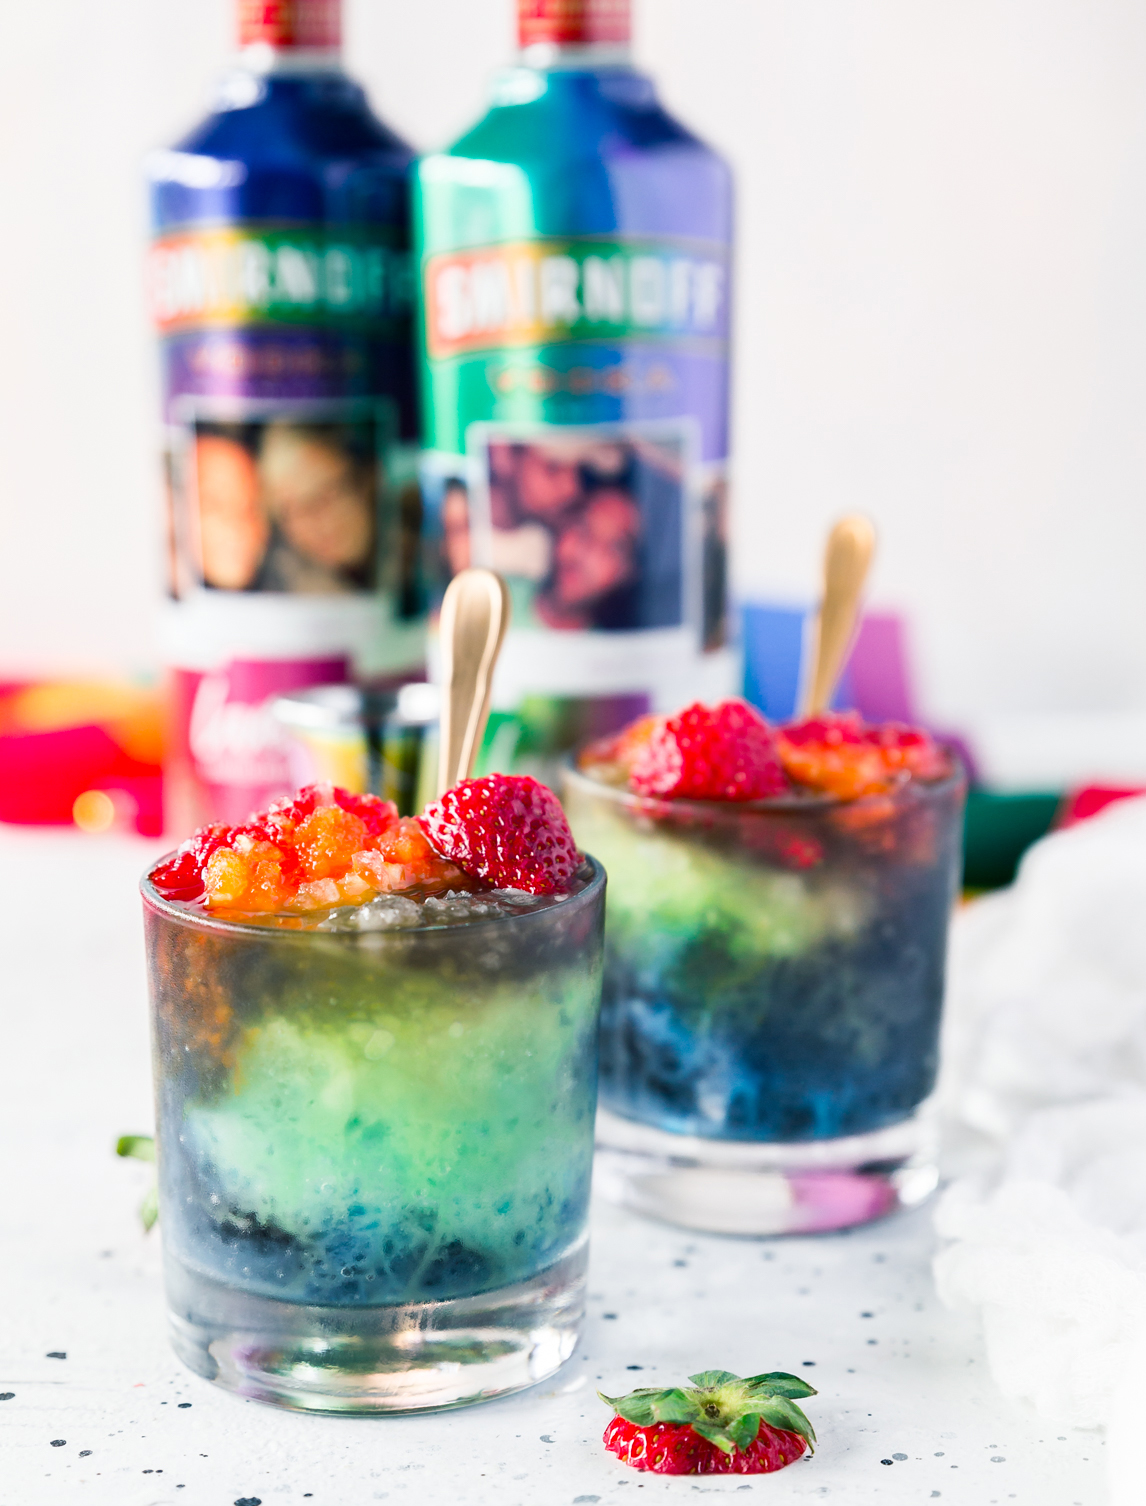 The Smirnoff Pride Rainbow Slushie is made with packets of different colored drink powders to create a rainbow effect. 